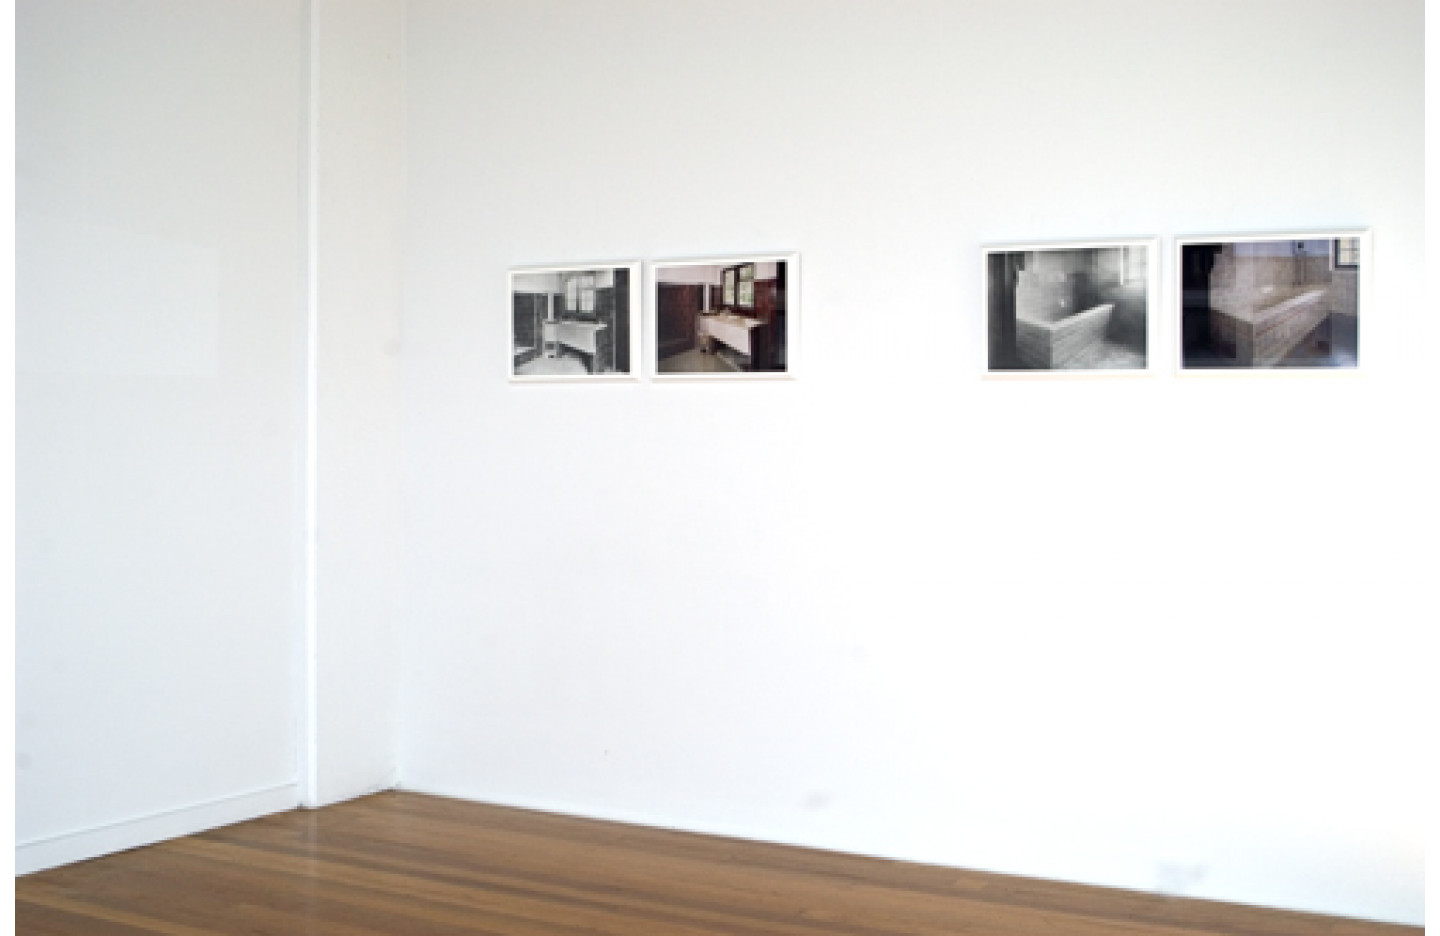 26 Photographs of a House, Ramp Gallery (2007)